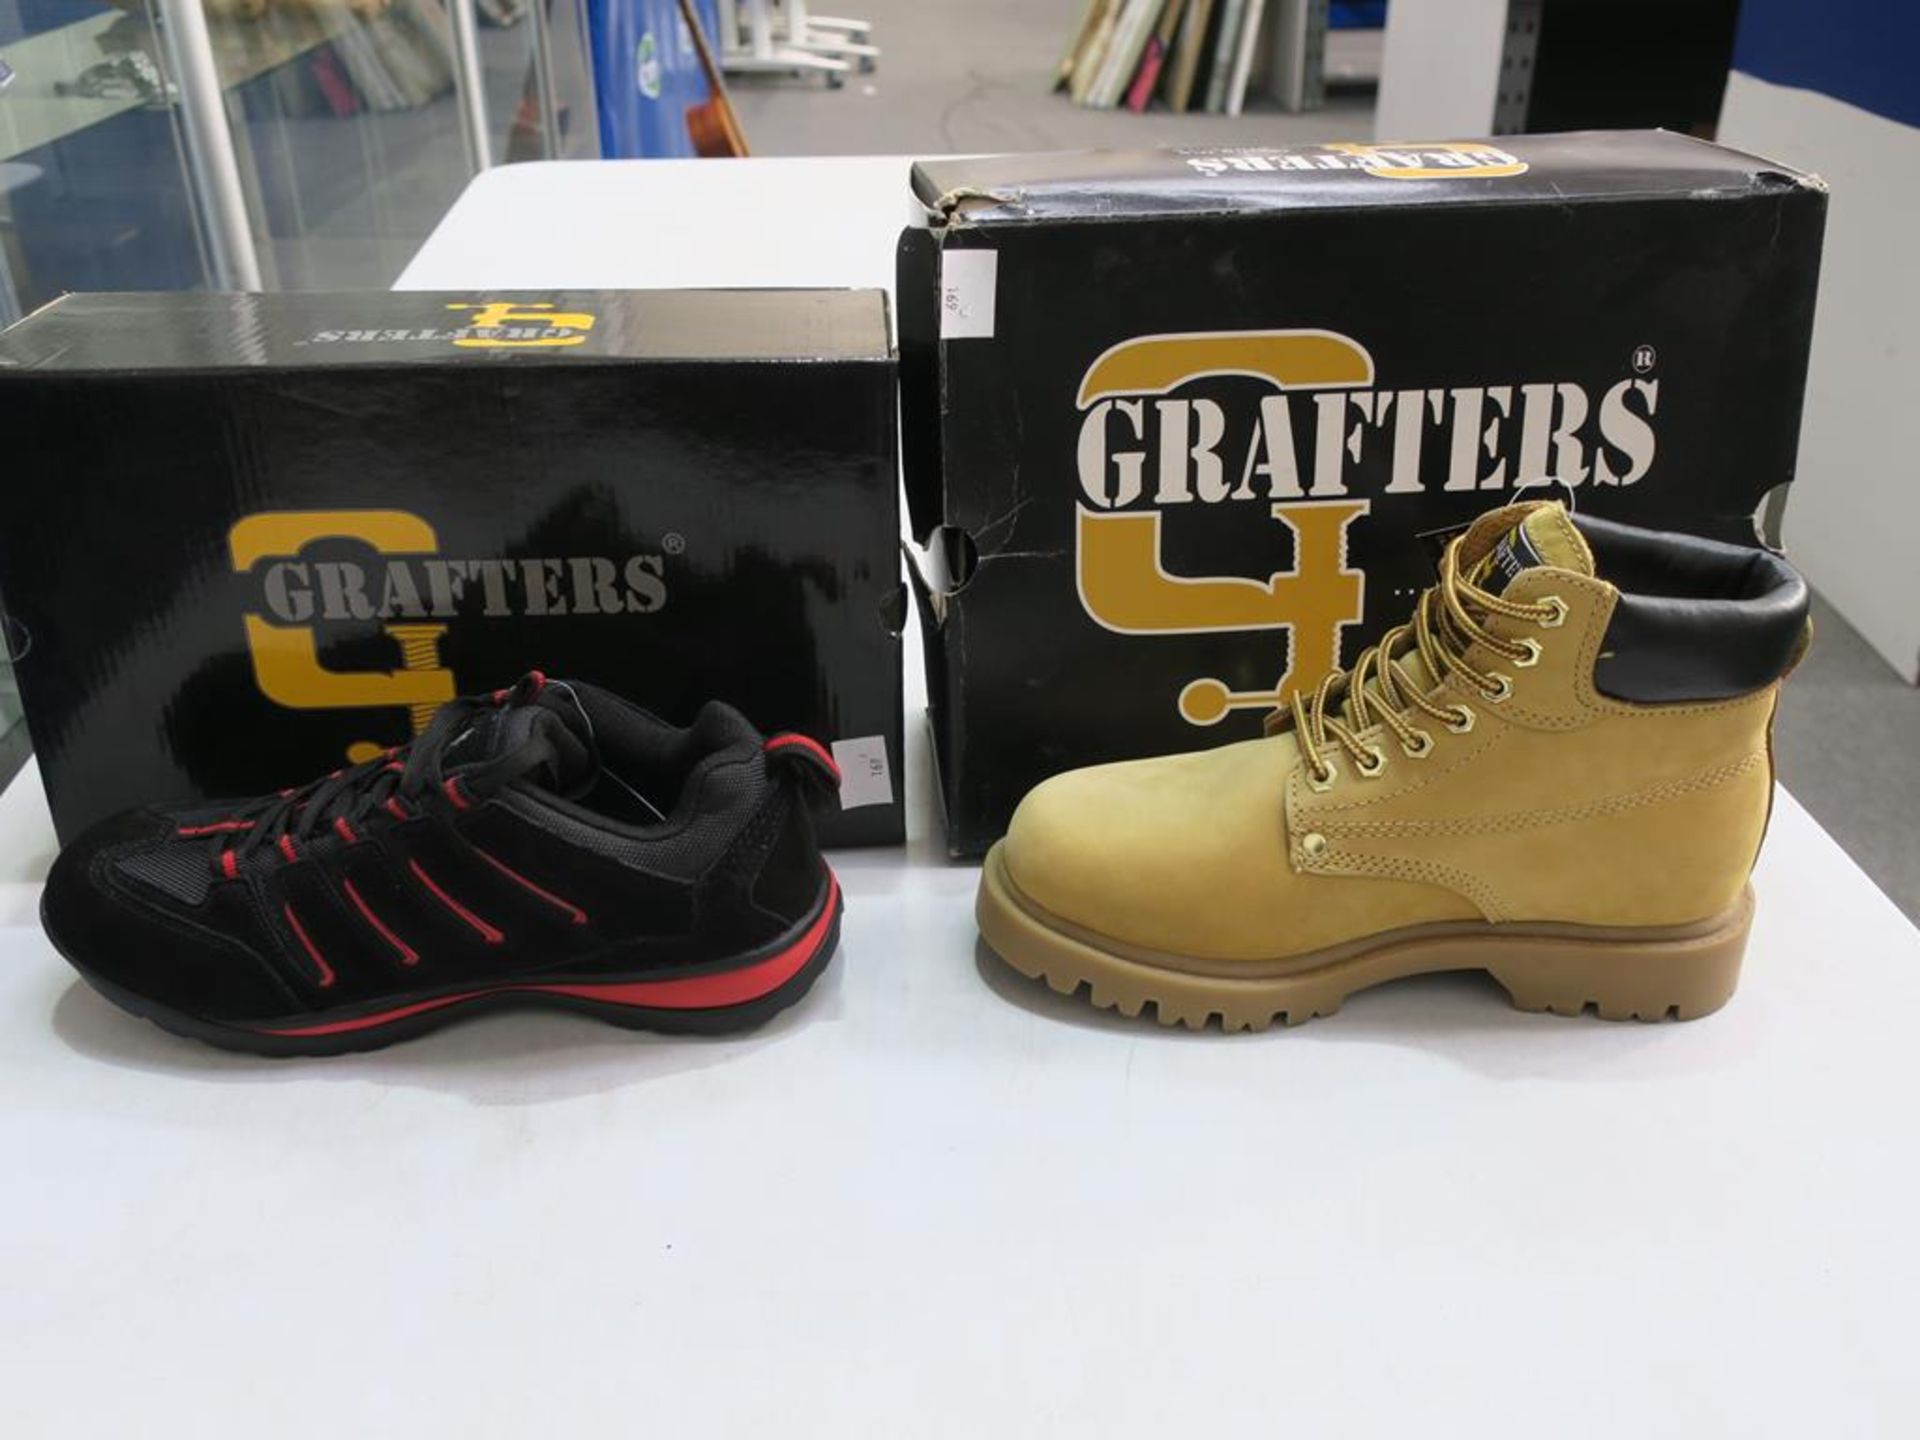 * Two pairs of new/boxed Grafters Footwear: a pair of Black/Red Safety Trainer Shoes 'Red Devil' - Image 2 of 3